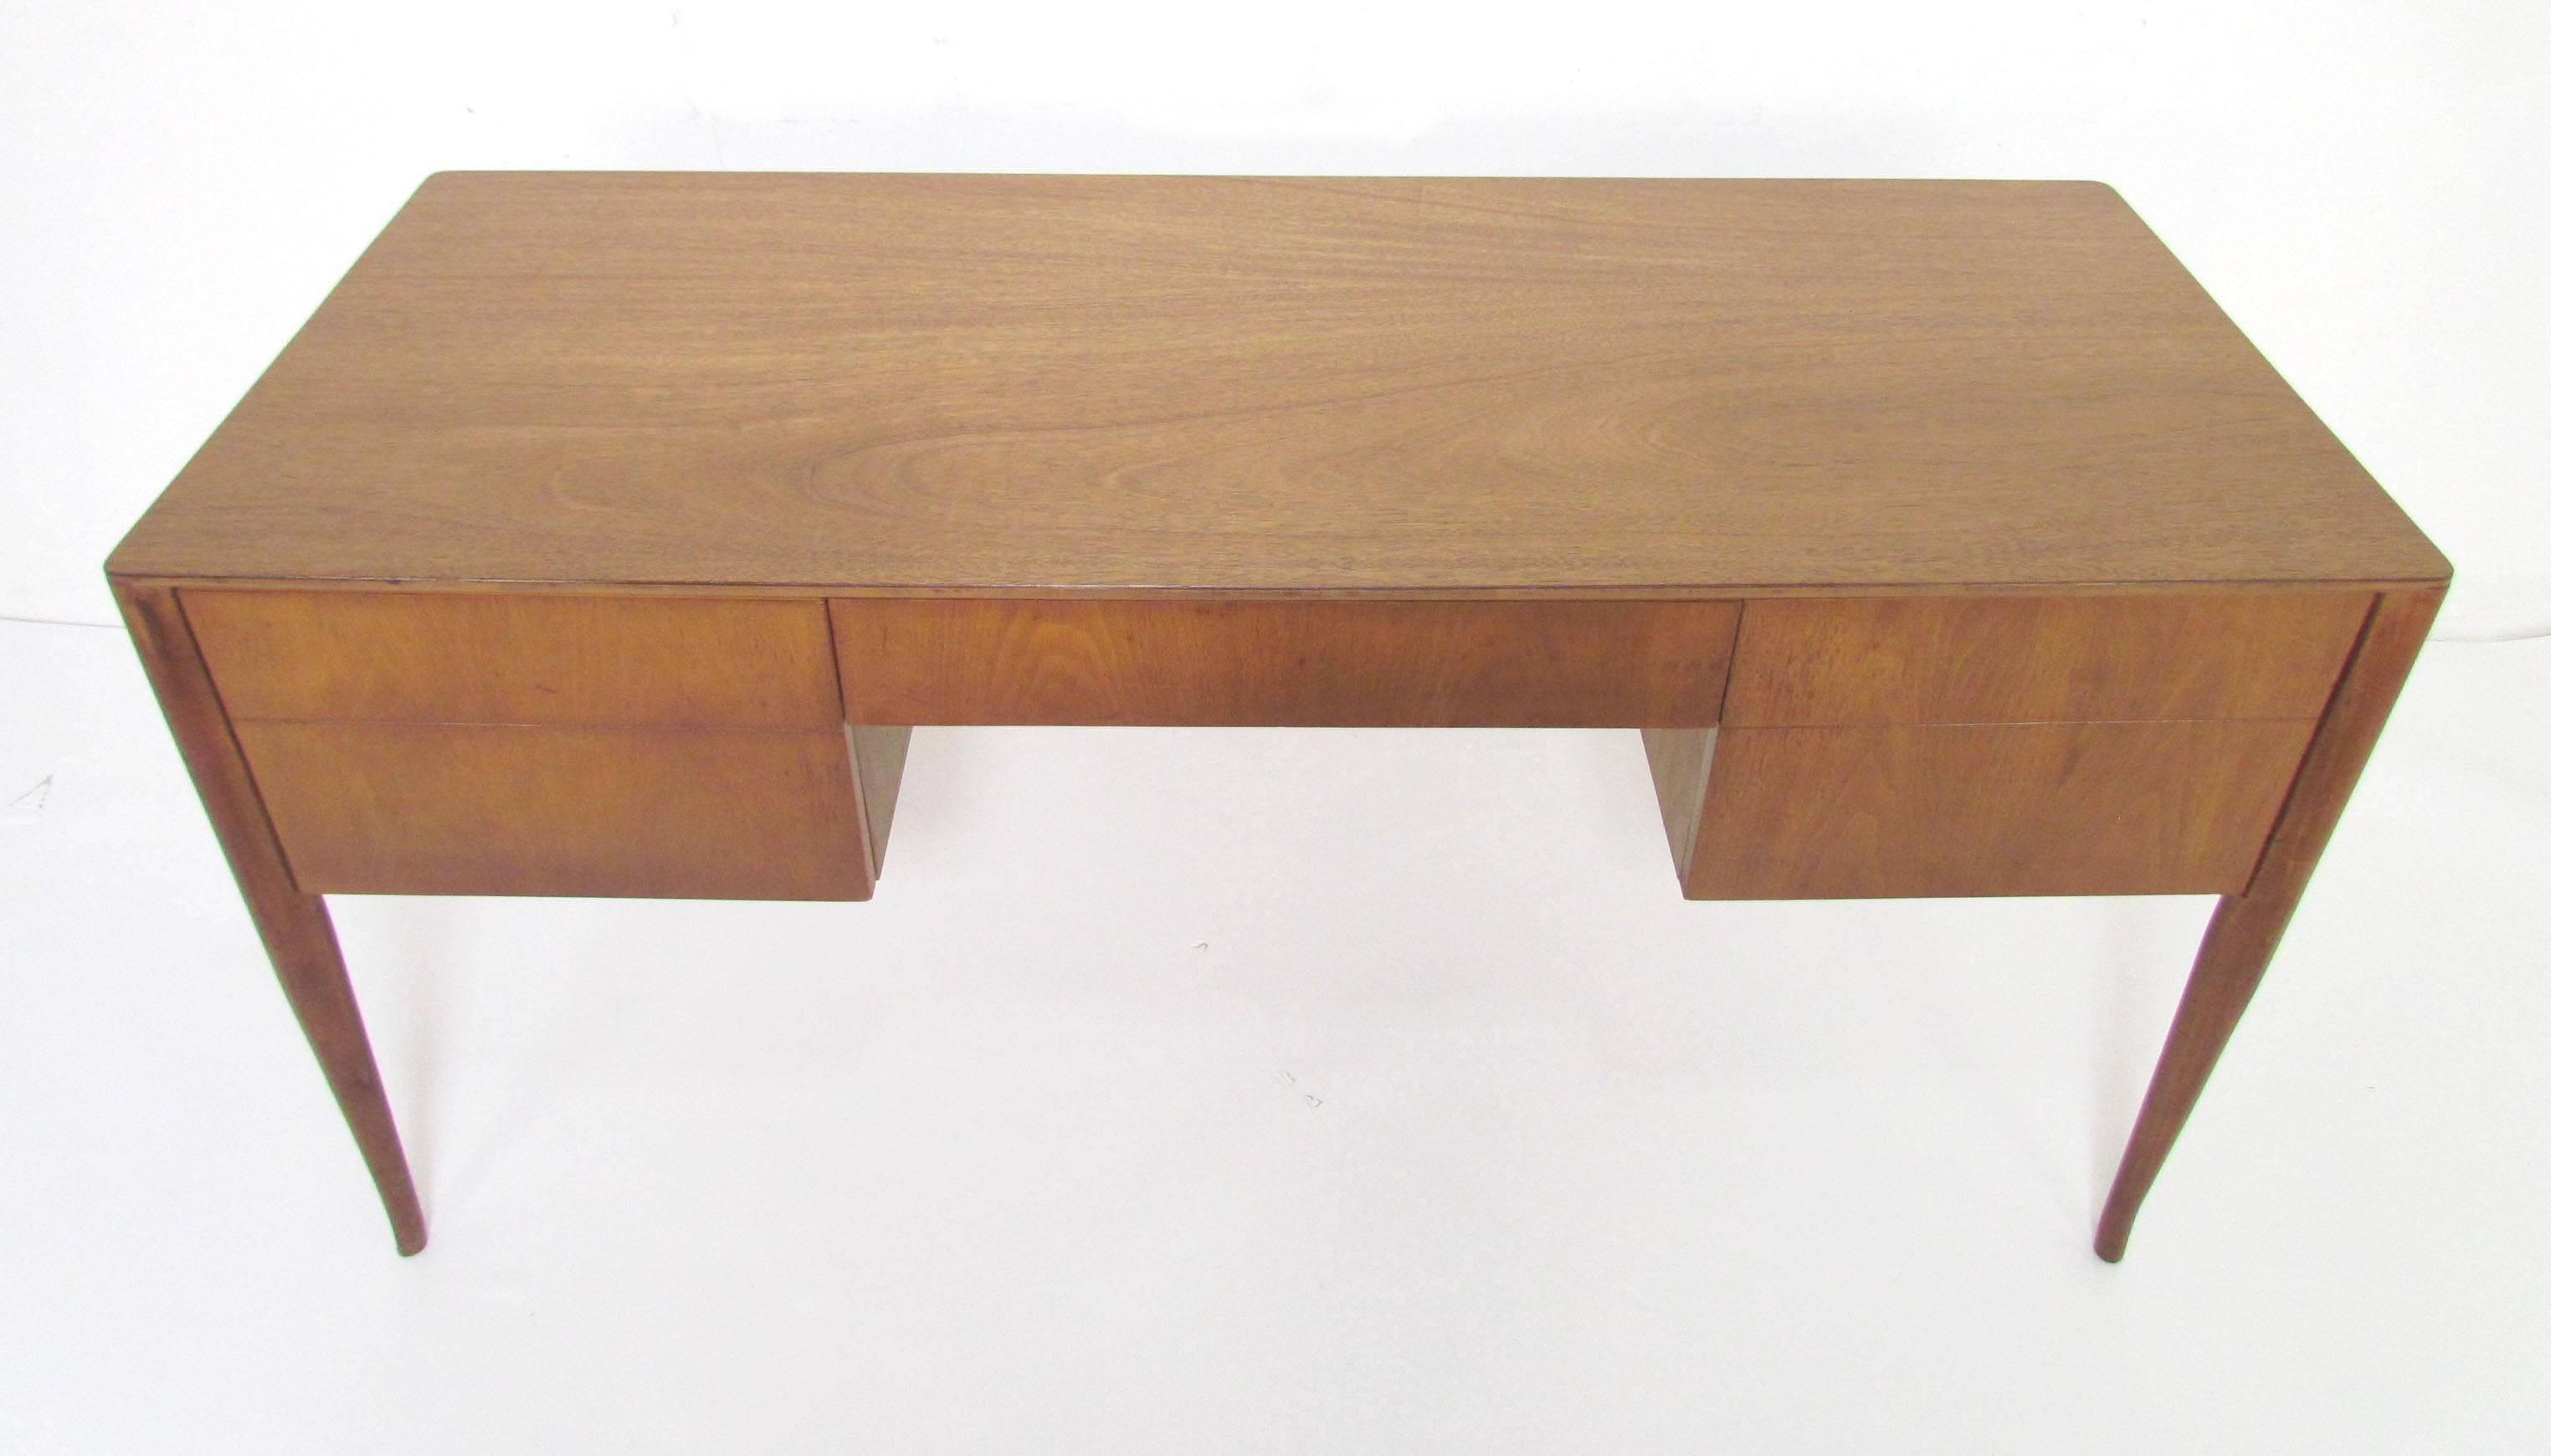 Sensuous writing desk with tapered saber legs by T.H. Robsjohn-Gibbings for Widdicomb, circa 1950s. Two flanking drawers on either side of center pencil drawer. Finished back allows this desk to float in a room or serve as a reception desk.